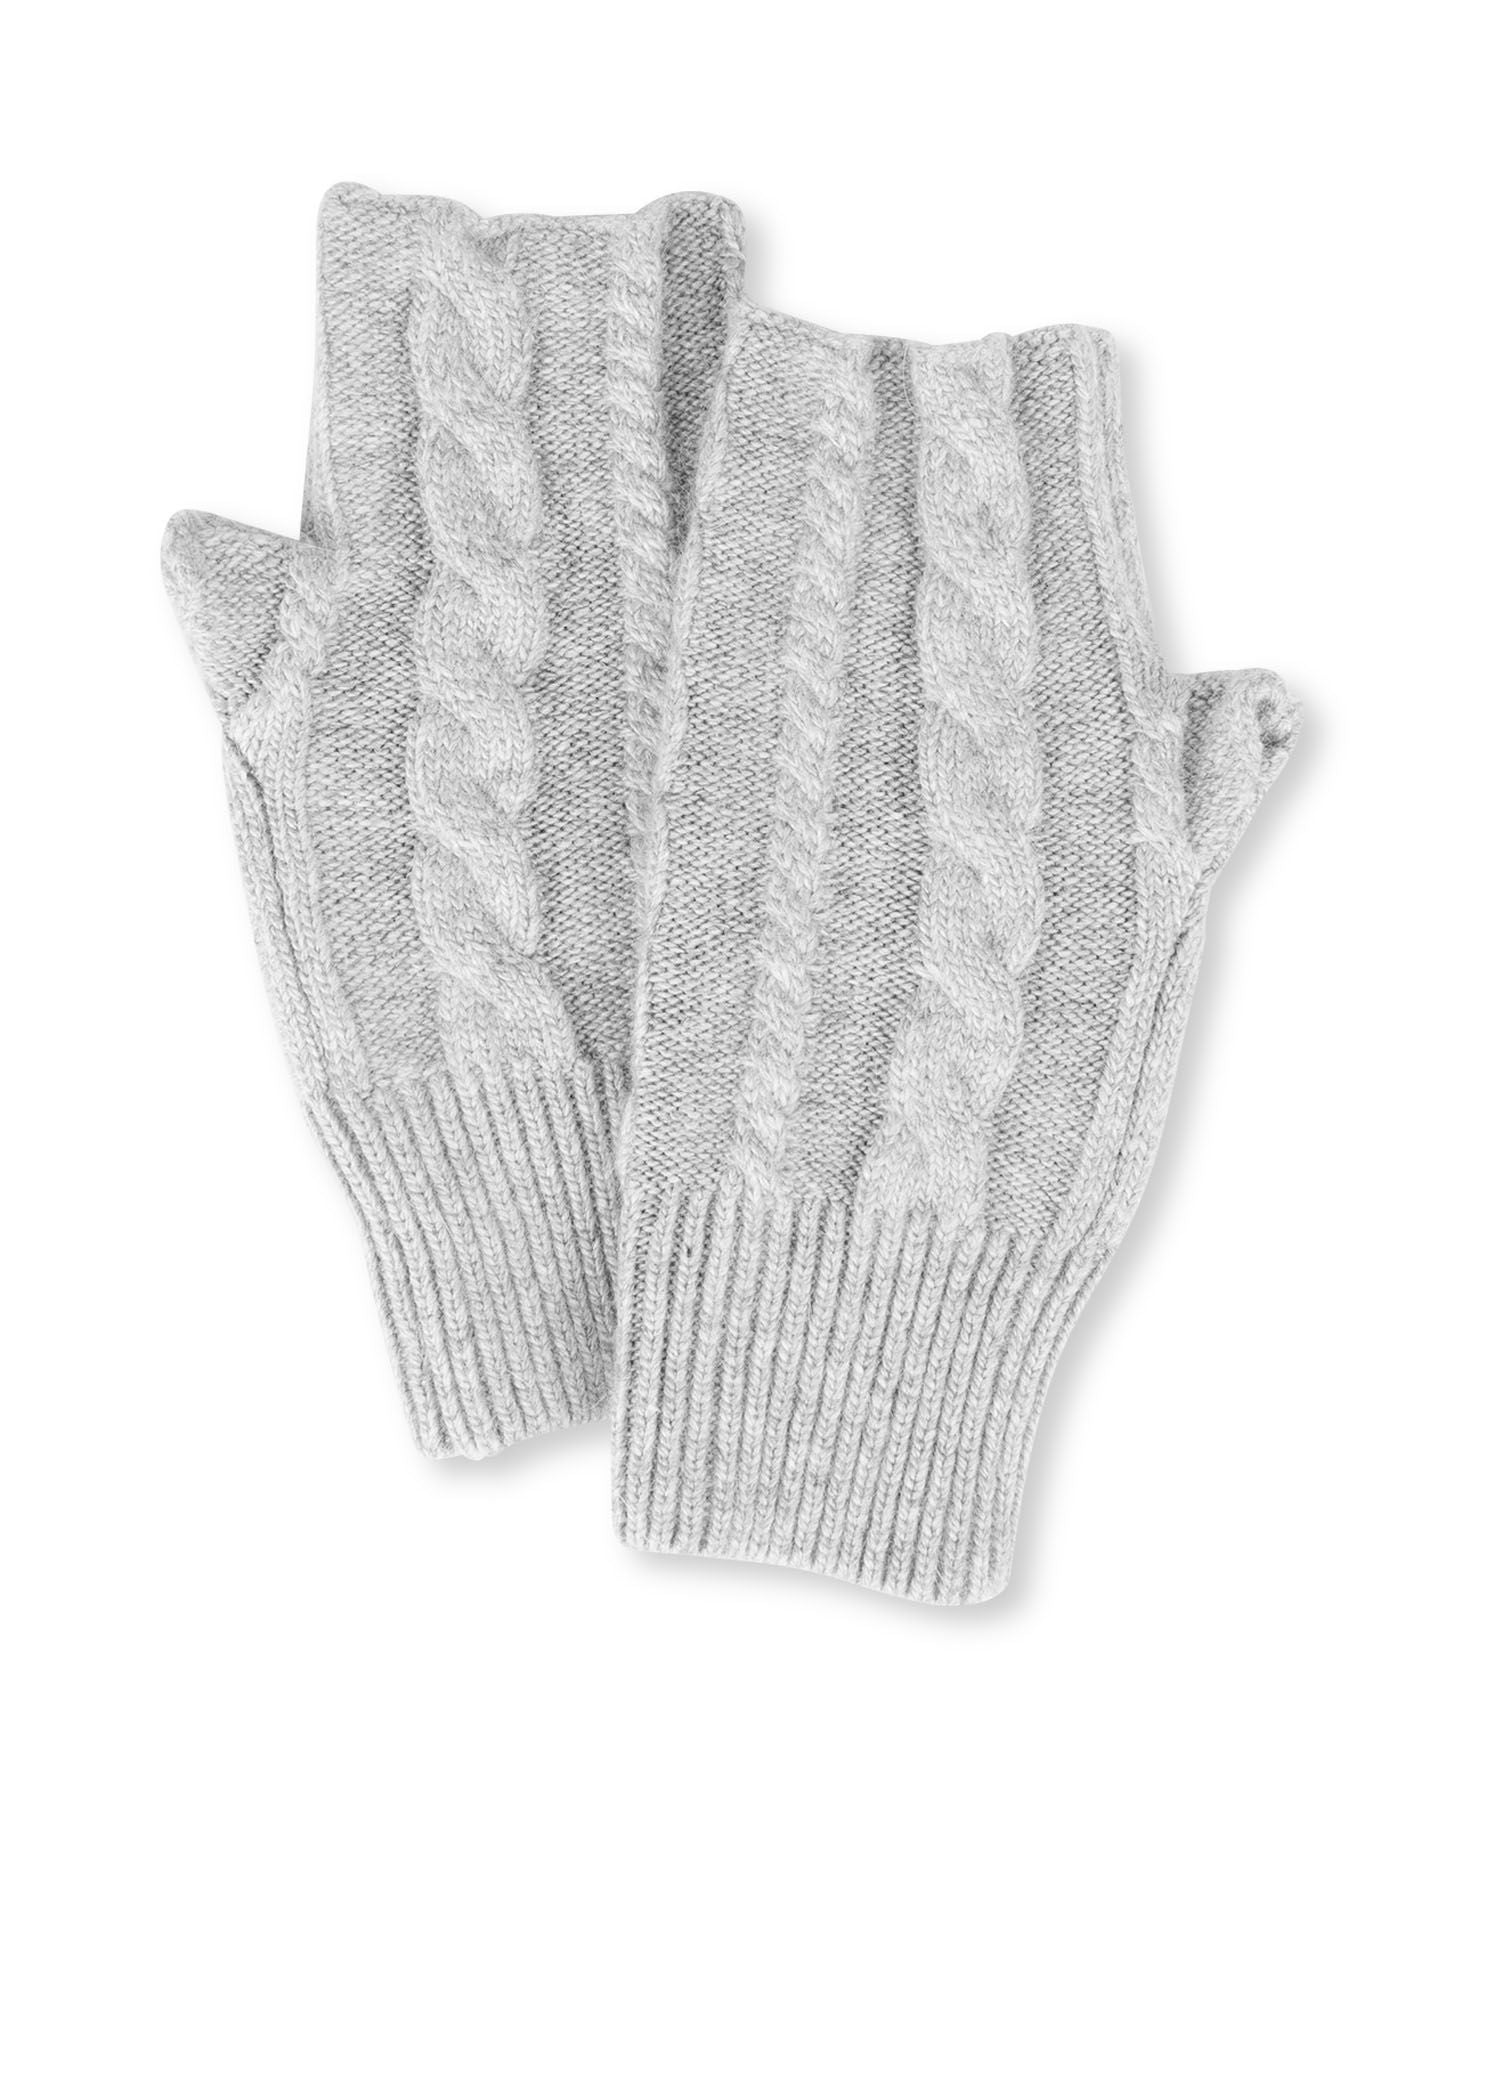 cabin cable fingerless glove gray